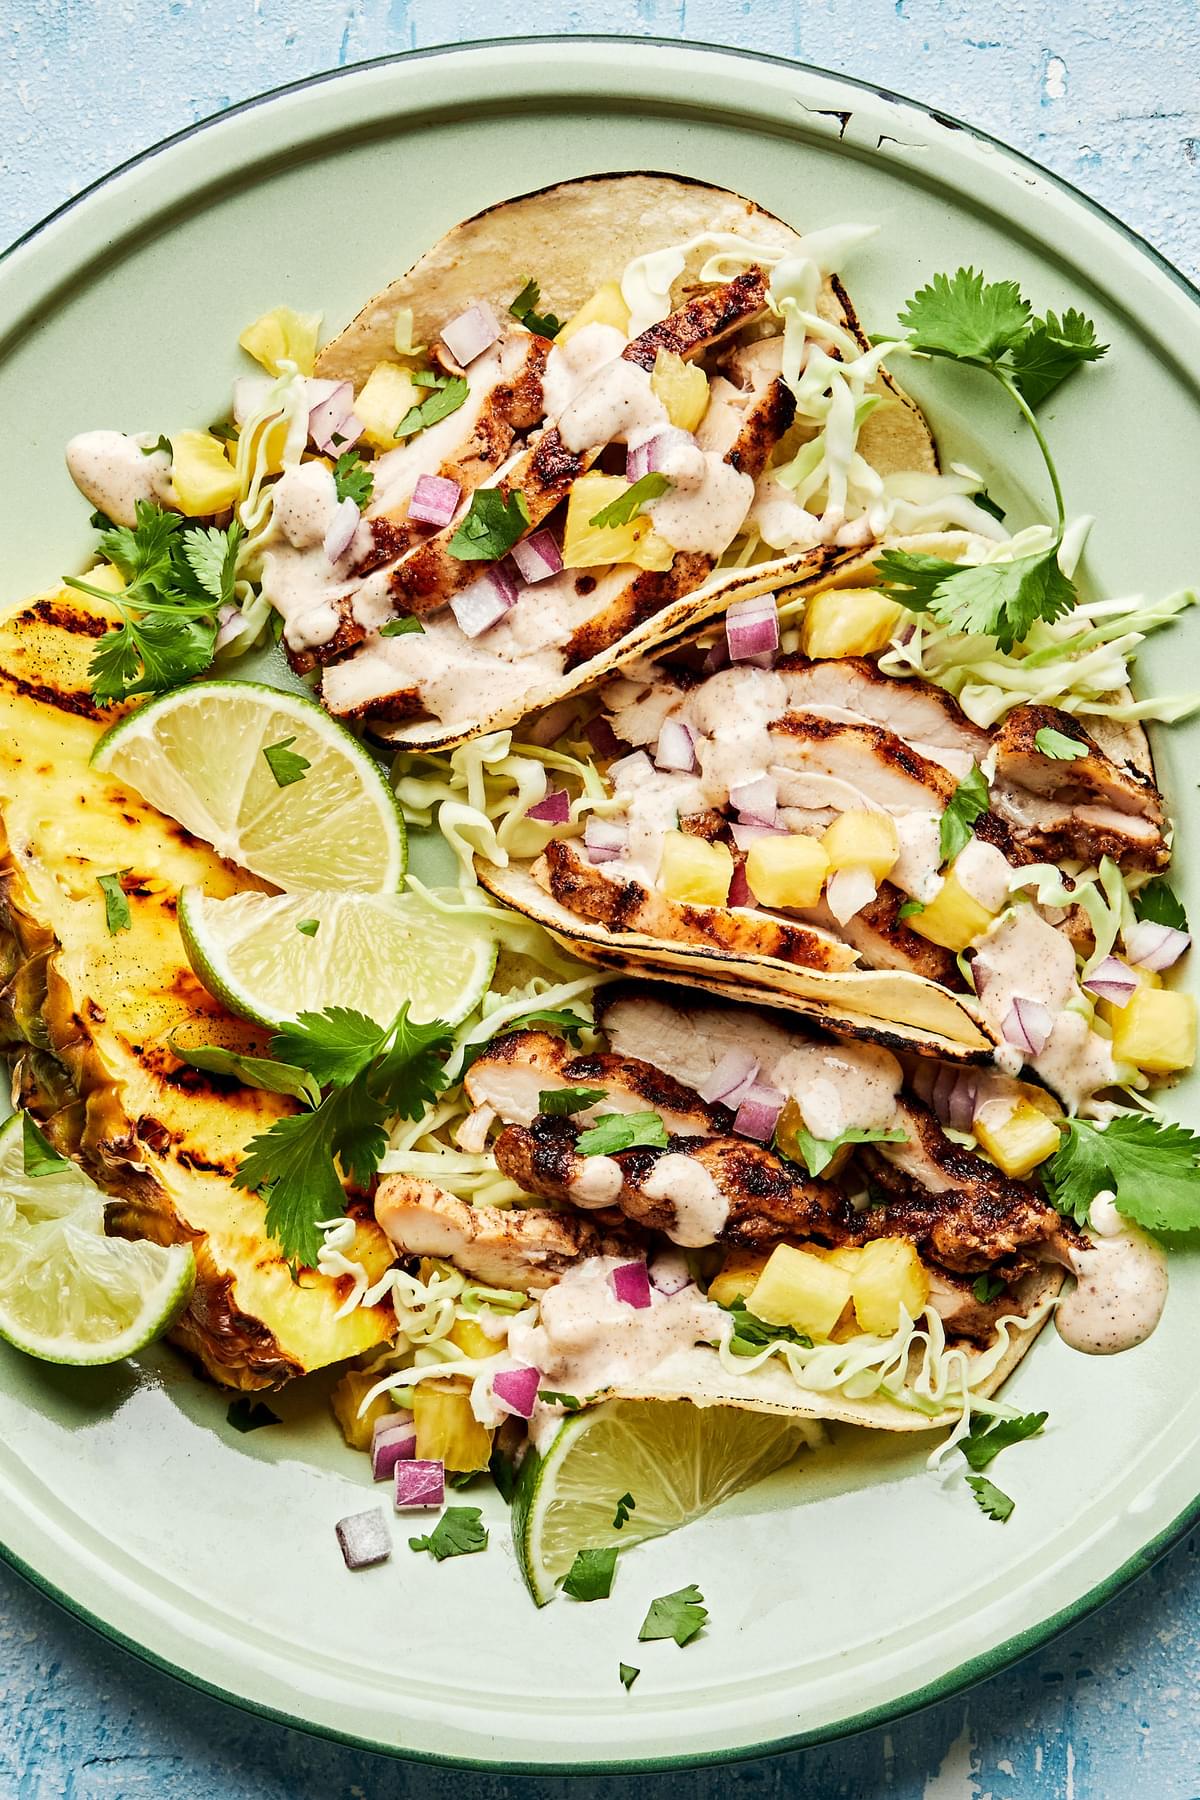 jerk chicken tacos topped with onion, pineapple, cabbage, cilantro and jerk aioli. served with a wedge of grilled pineapple